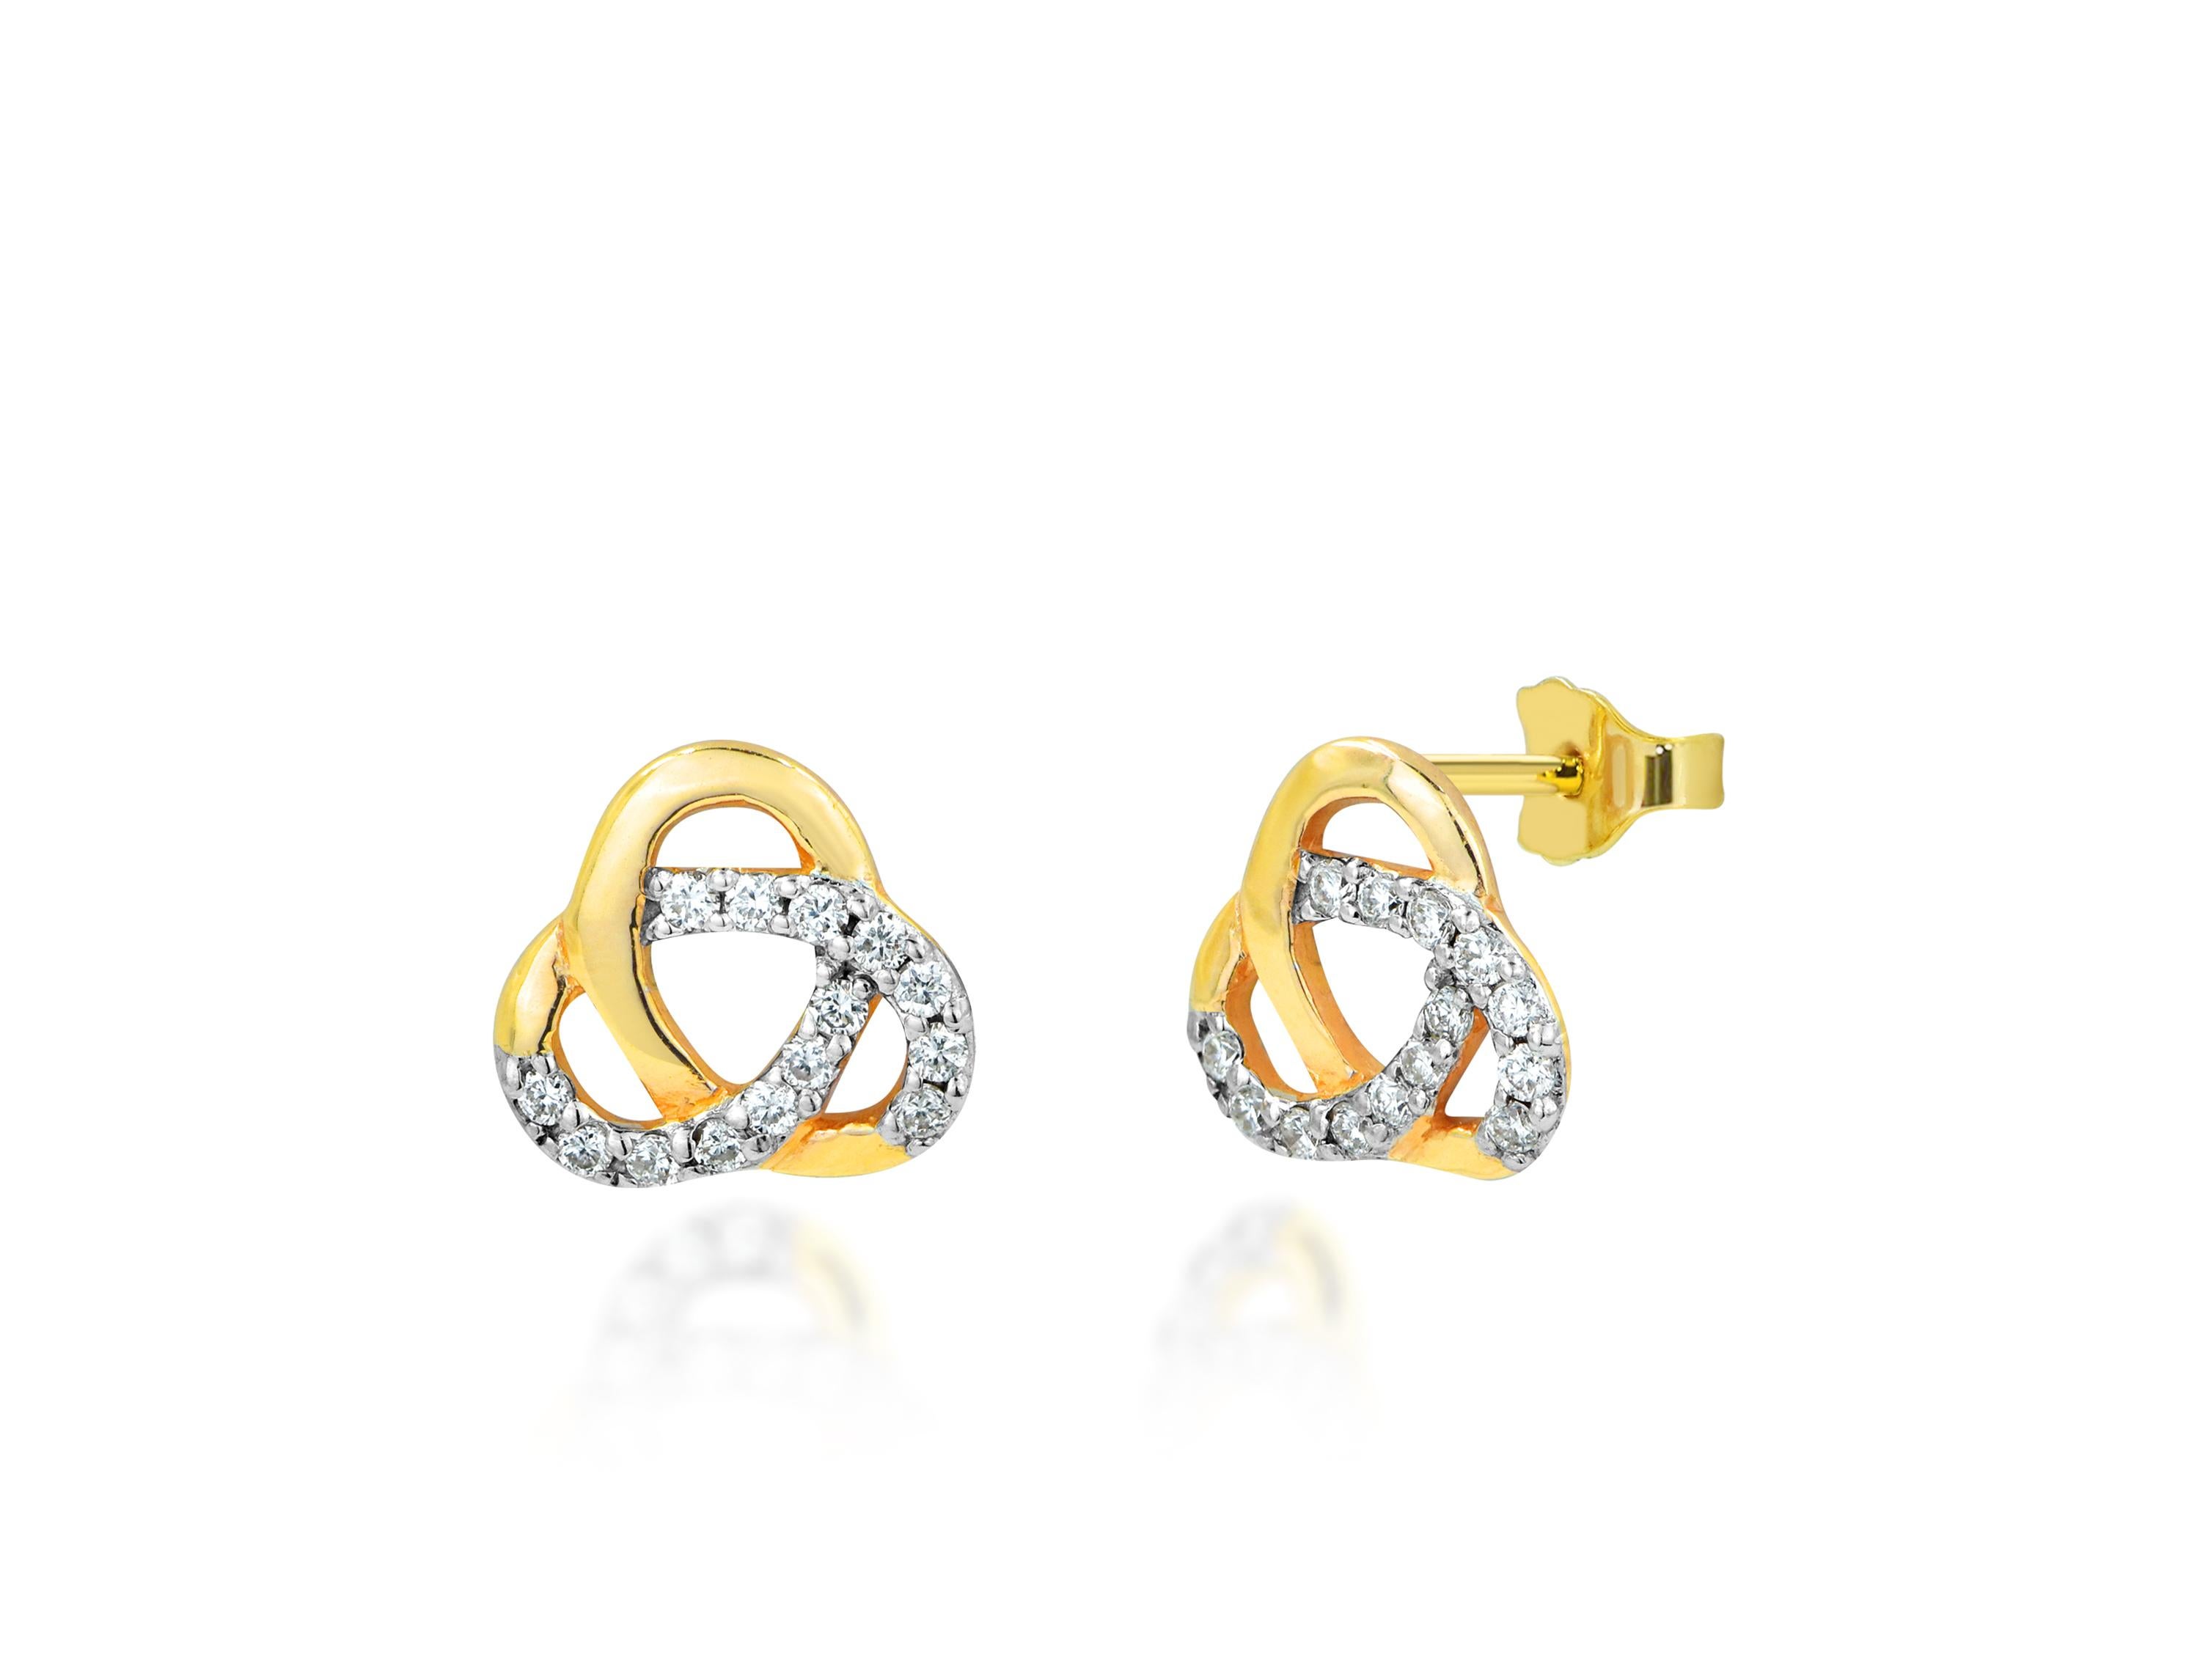 Diamond Love Knot Stud Earrings in 14k Rose Gold, Yellow Gold, White Gold.

These Dainty Stud Earrings are made of 14k solid gold featuring shiny brilliant round cut natural diamonds set by master setter in our studio. Simple but unique, elegant and